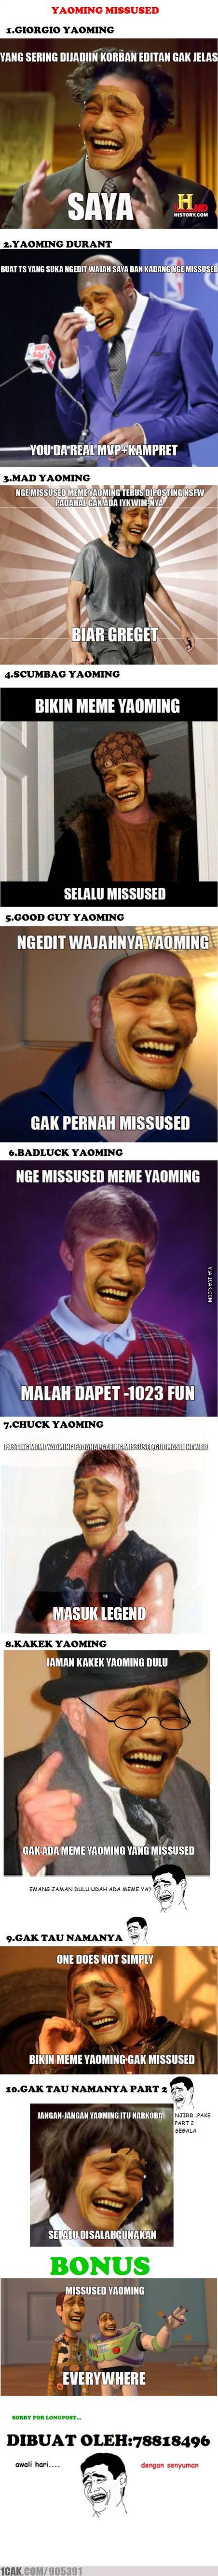 Yaoming Missused 1CAK For Fun Only